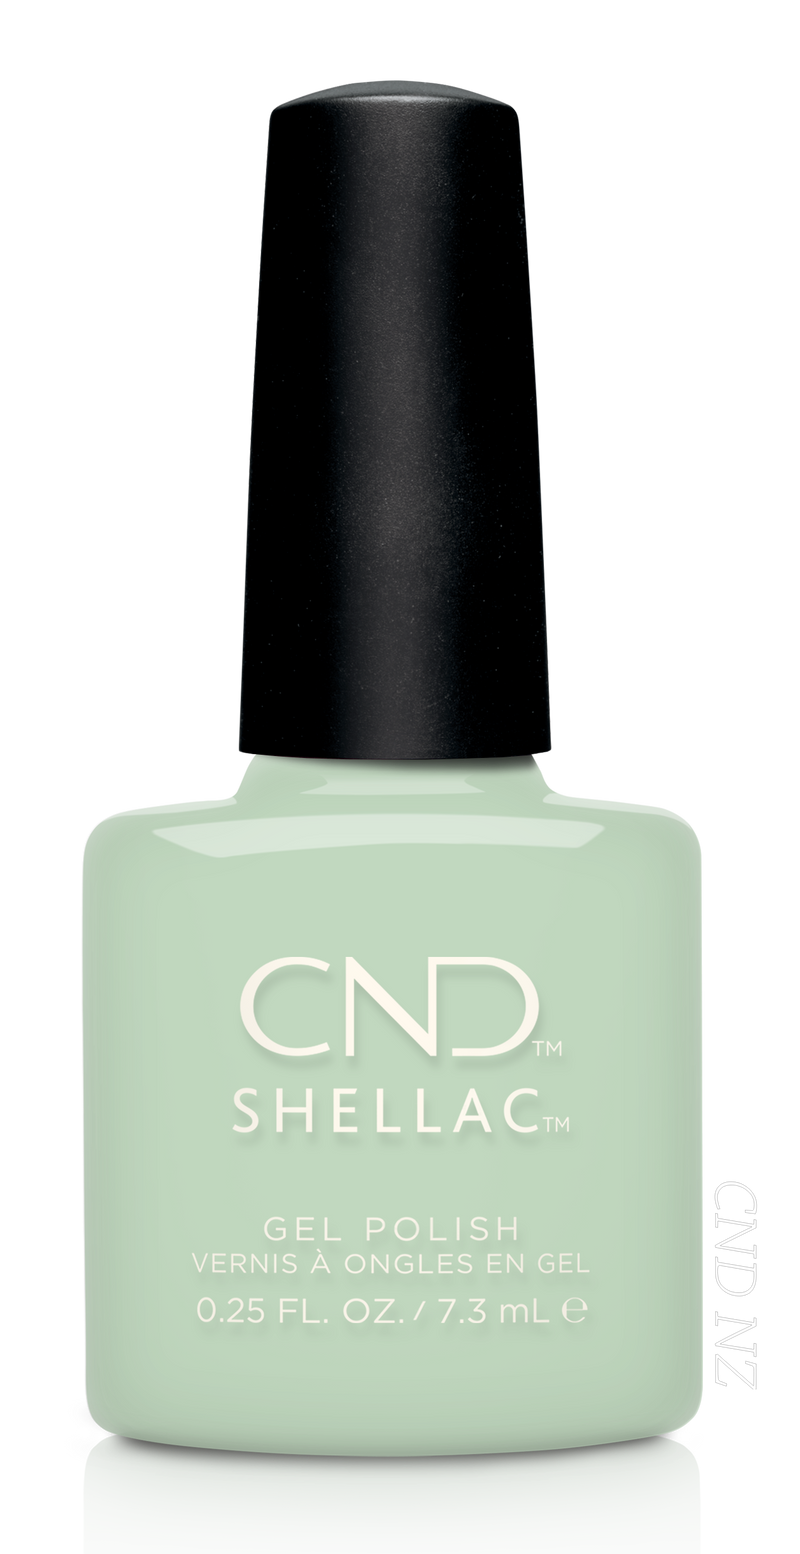 CND SHELLAC - Magical Topiary